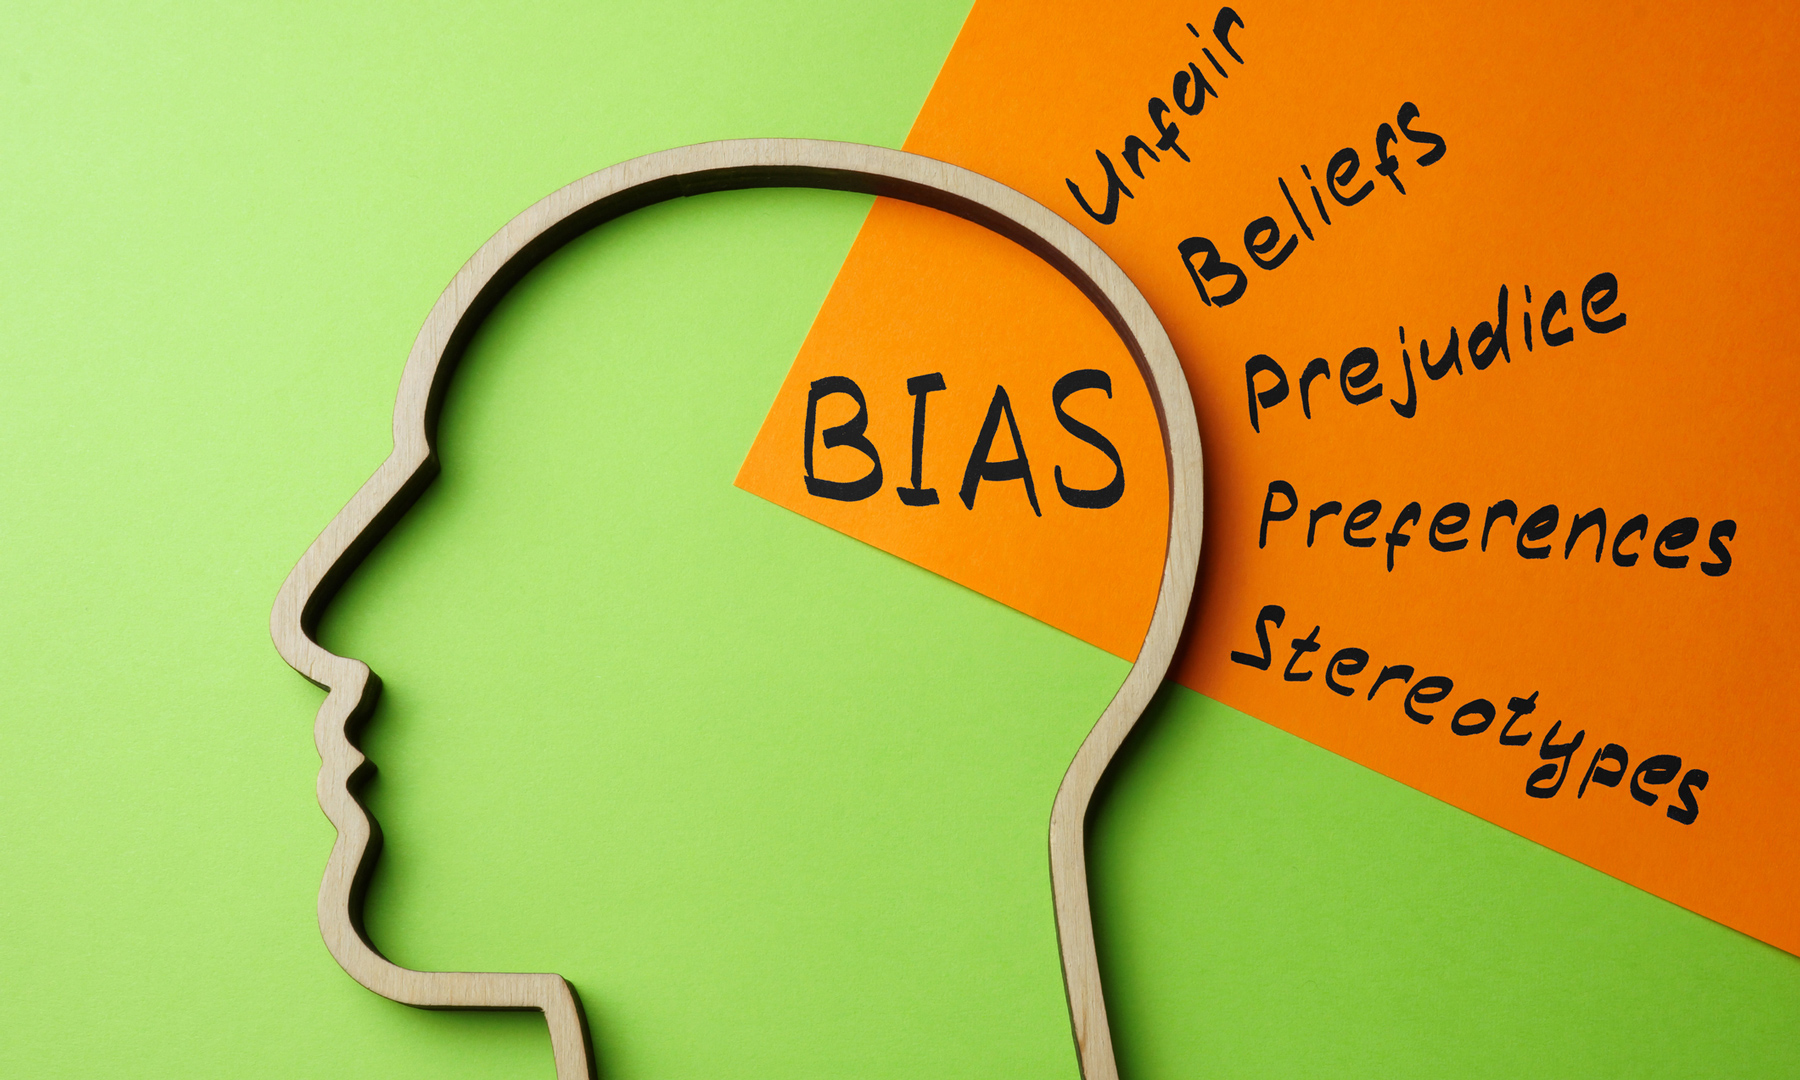 An illustration of a person's head with the word "bias" and related terms.